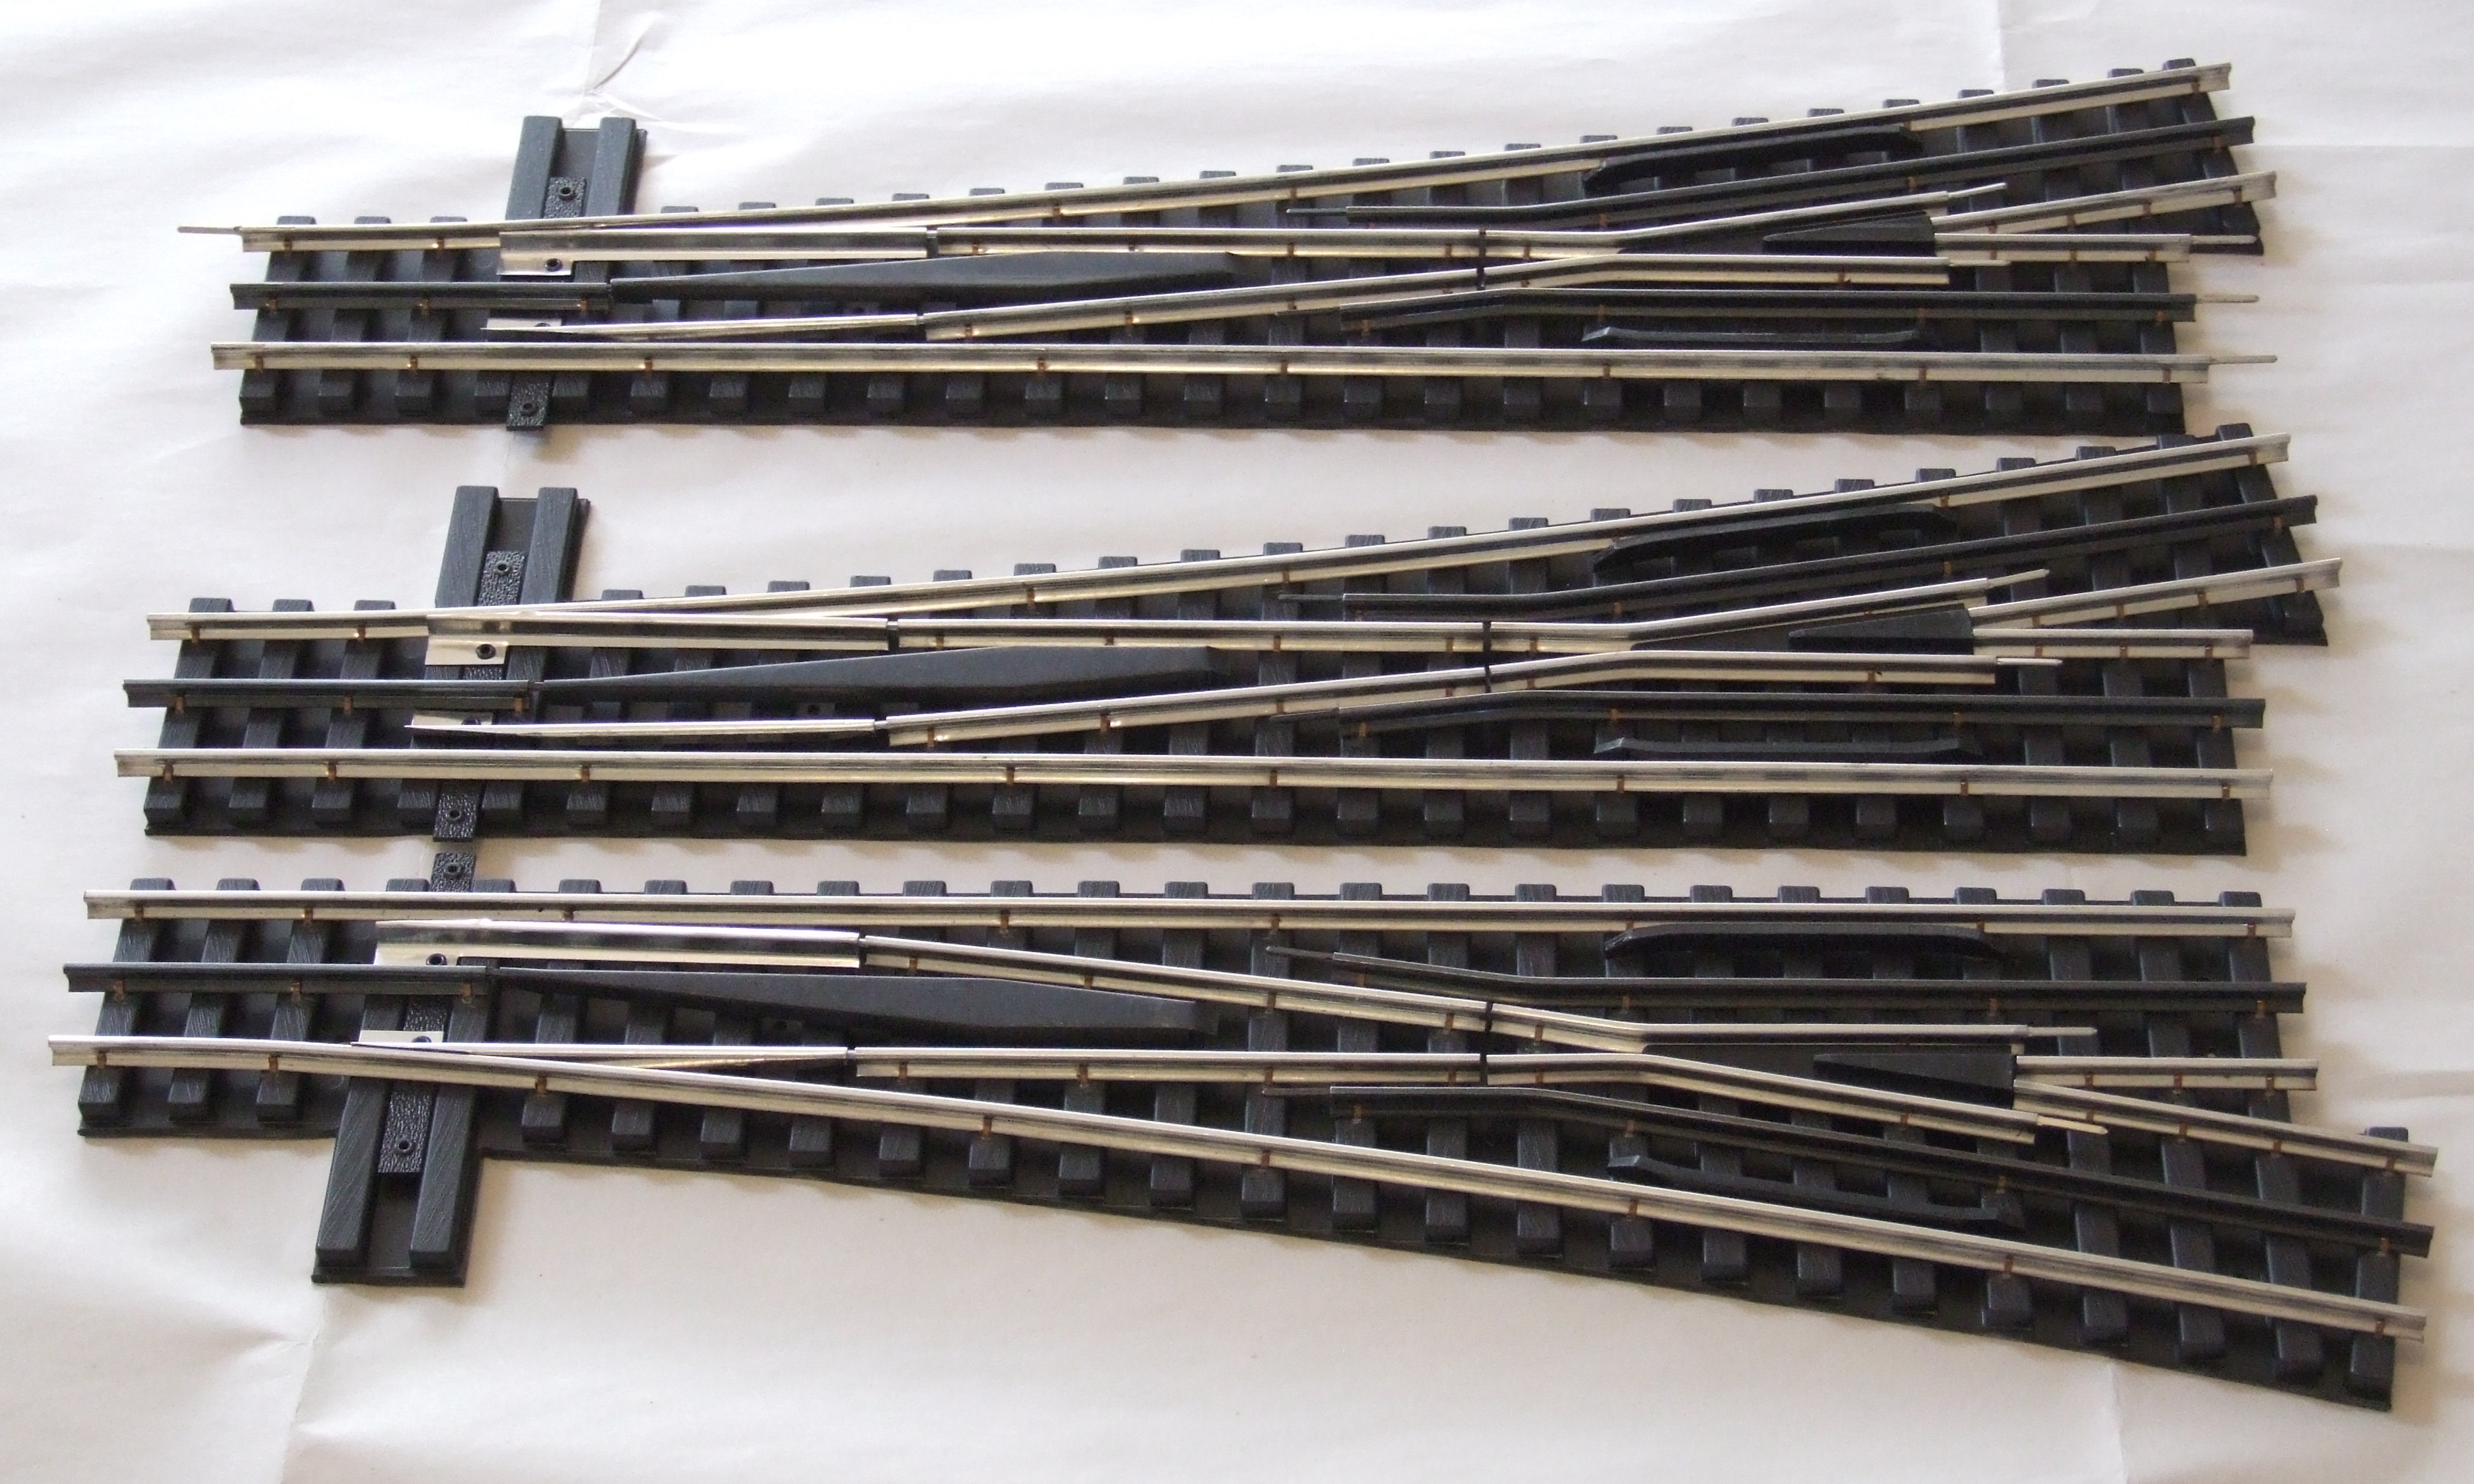  Track for an O Gauge Model Railroad Layout | Free Model Railroad Plans